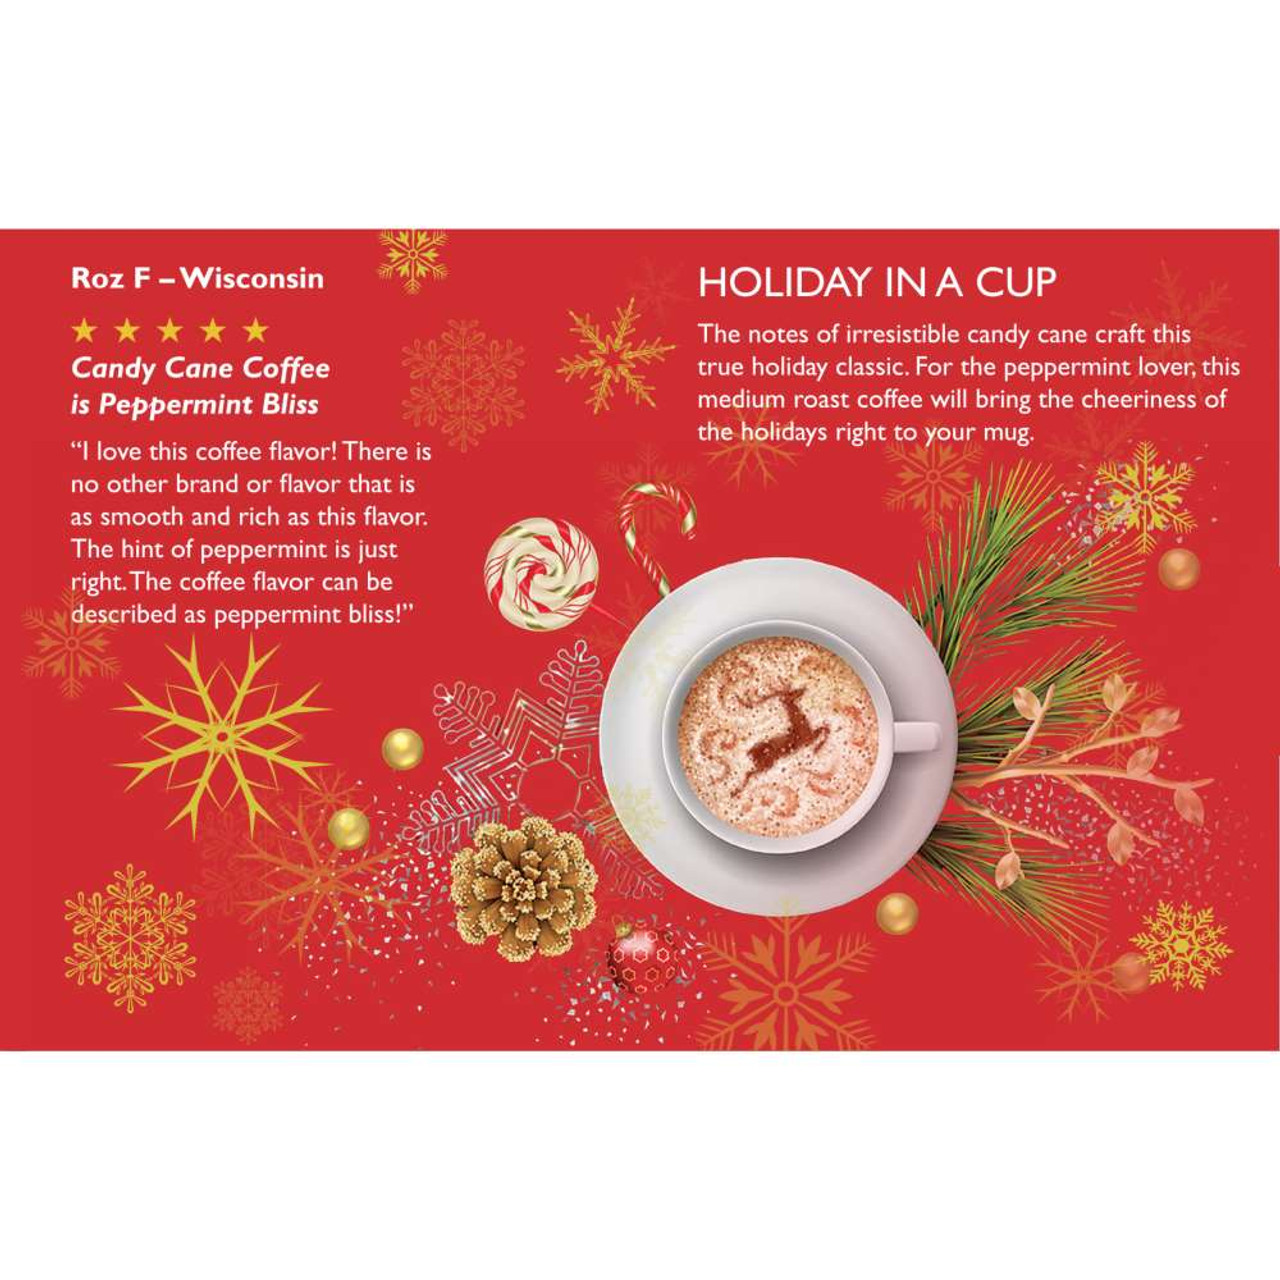 Candy Cane Coffee Single Serve Cups - 10 cups